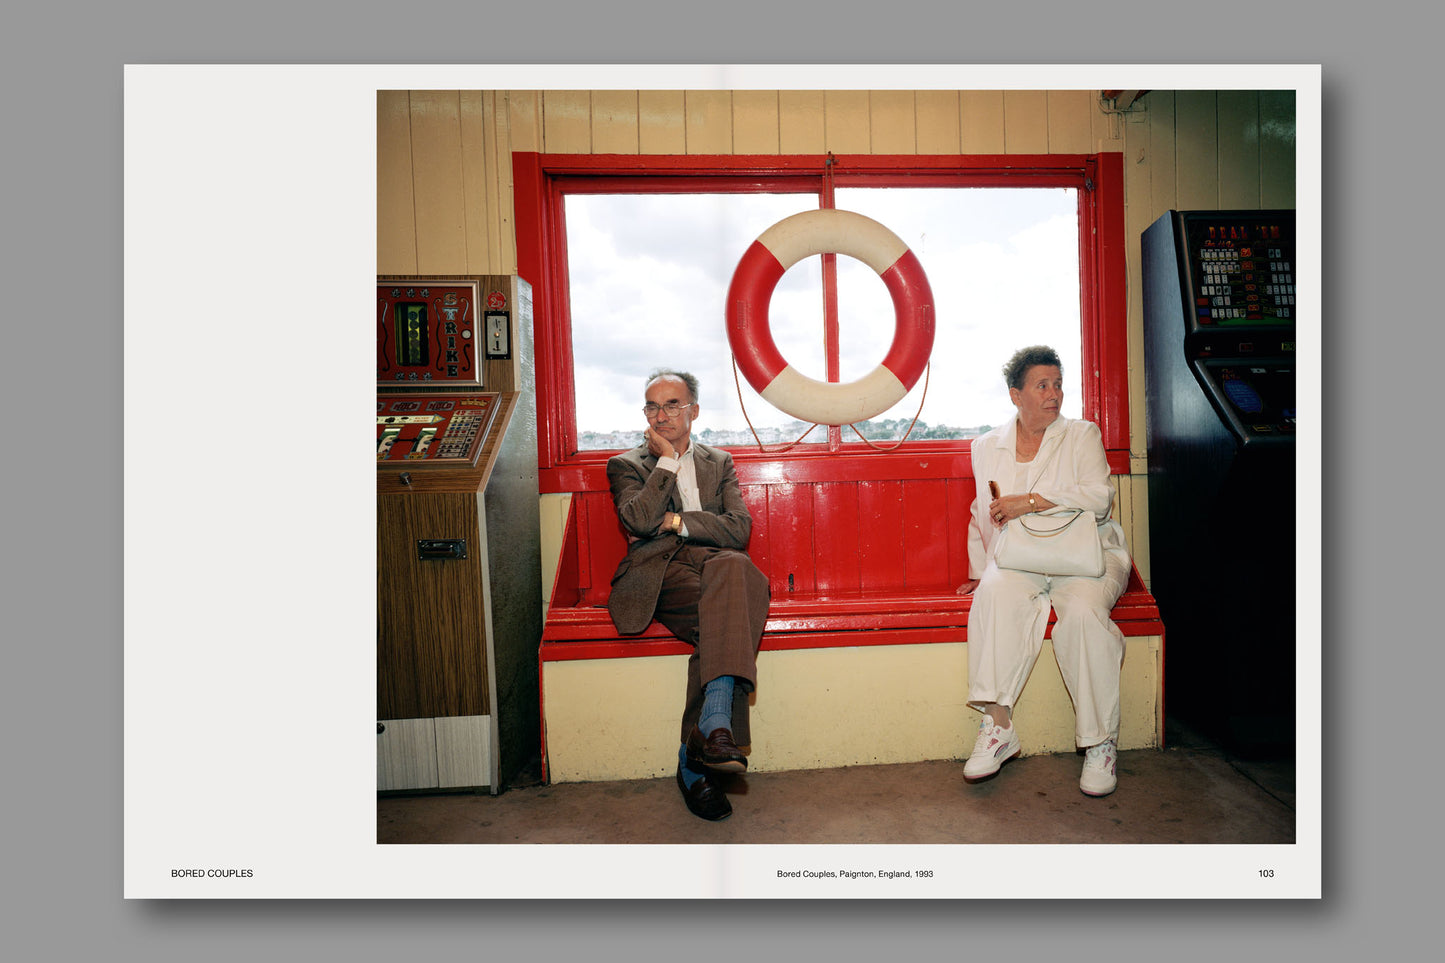 Issue 208: Martin Parr